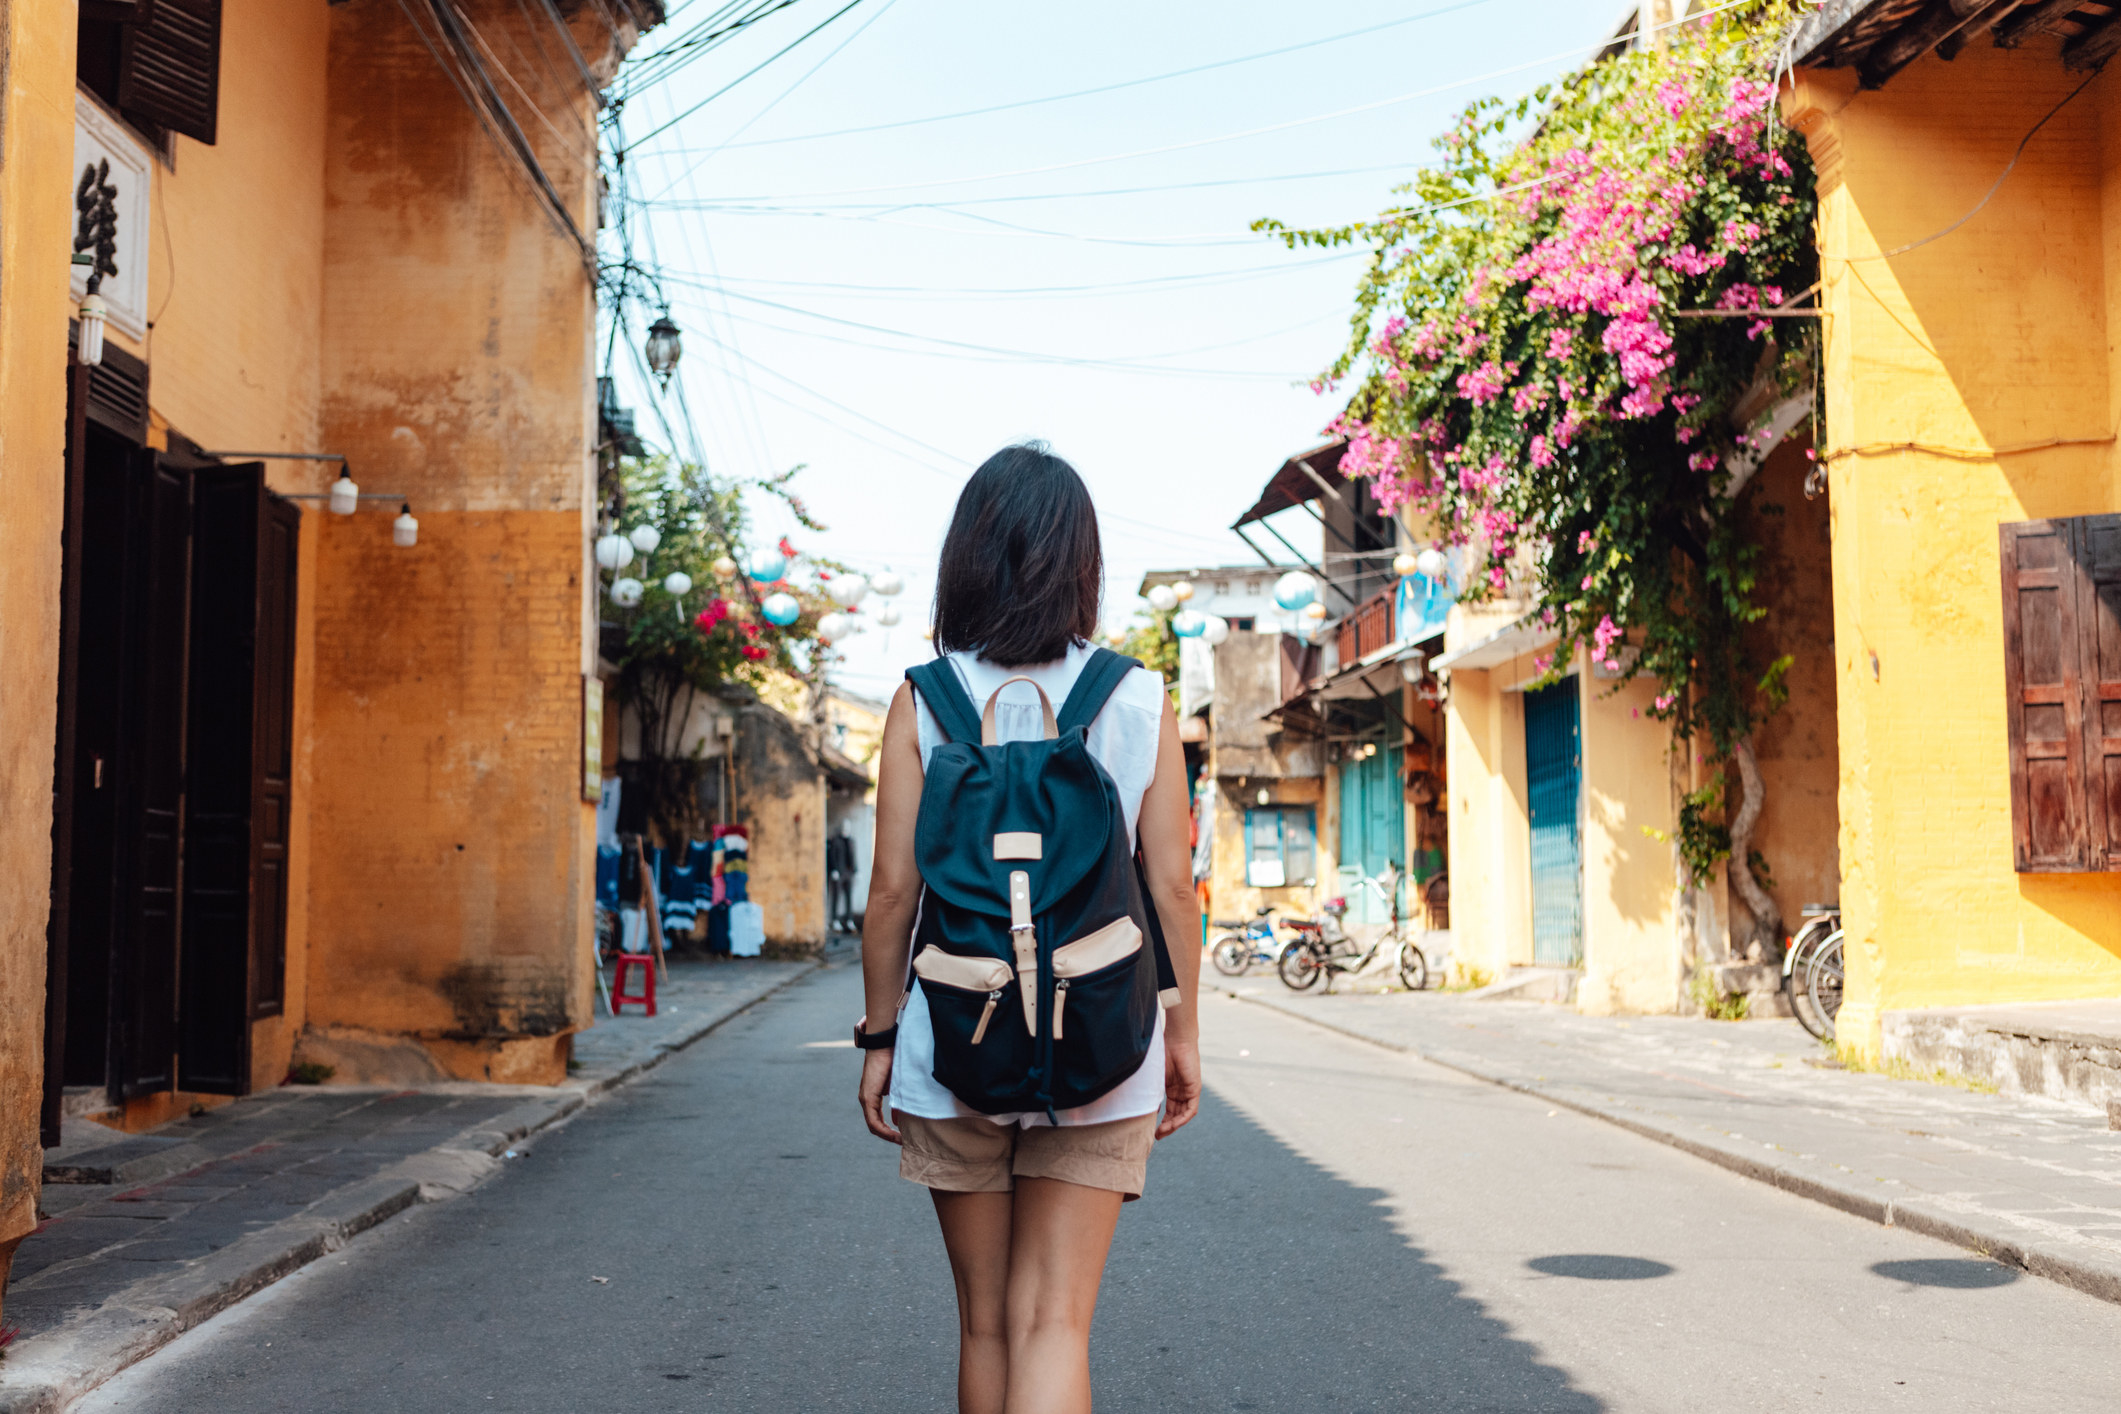 A young woman traveler walking on a quiet street with a backpack